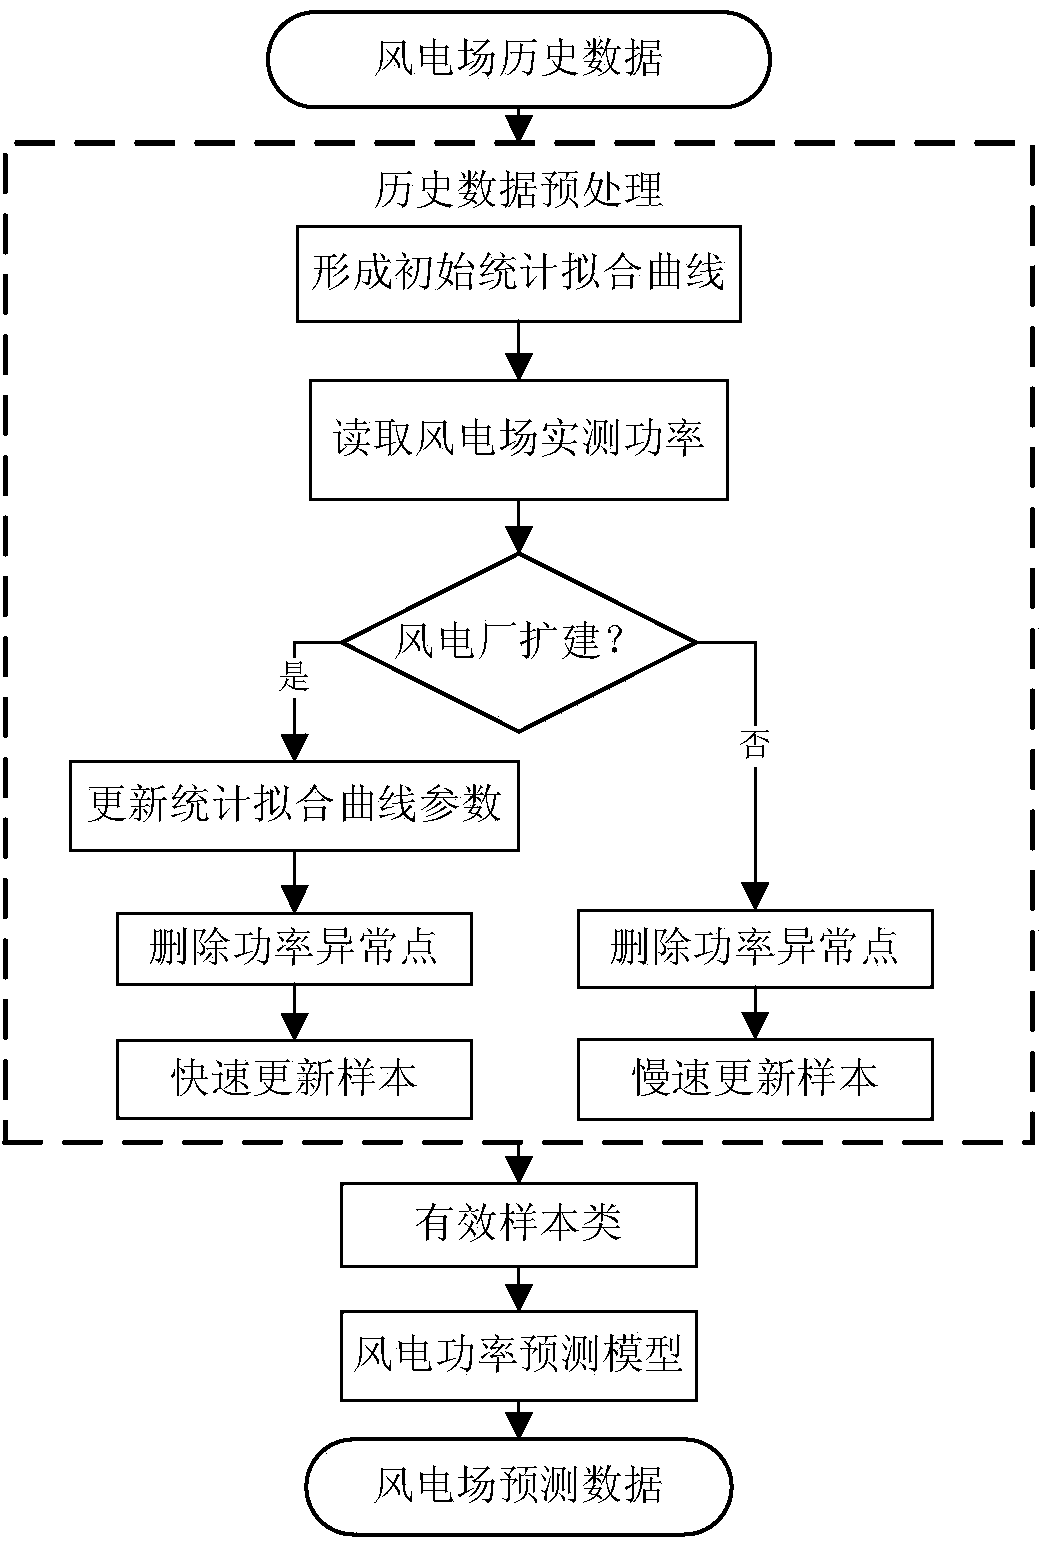 Wind power data preprocessing method, wind power forecast method and system